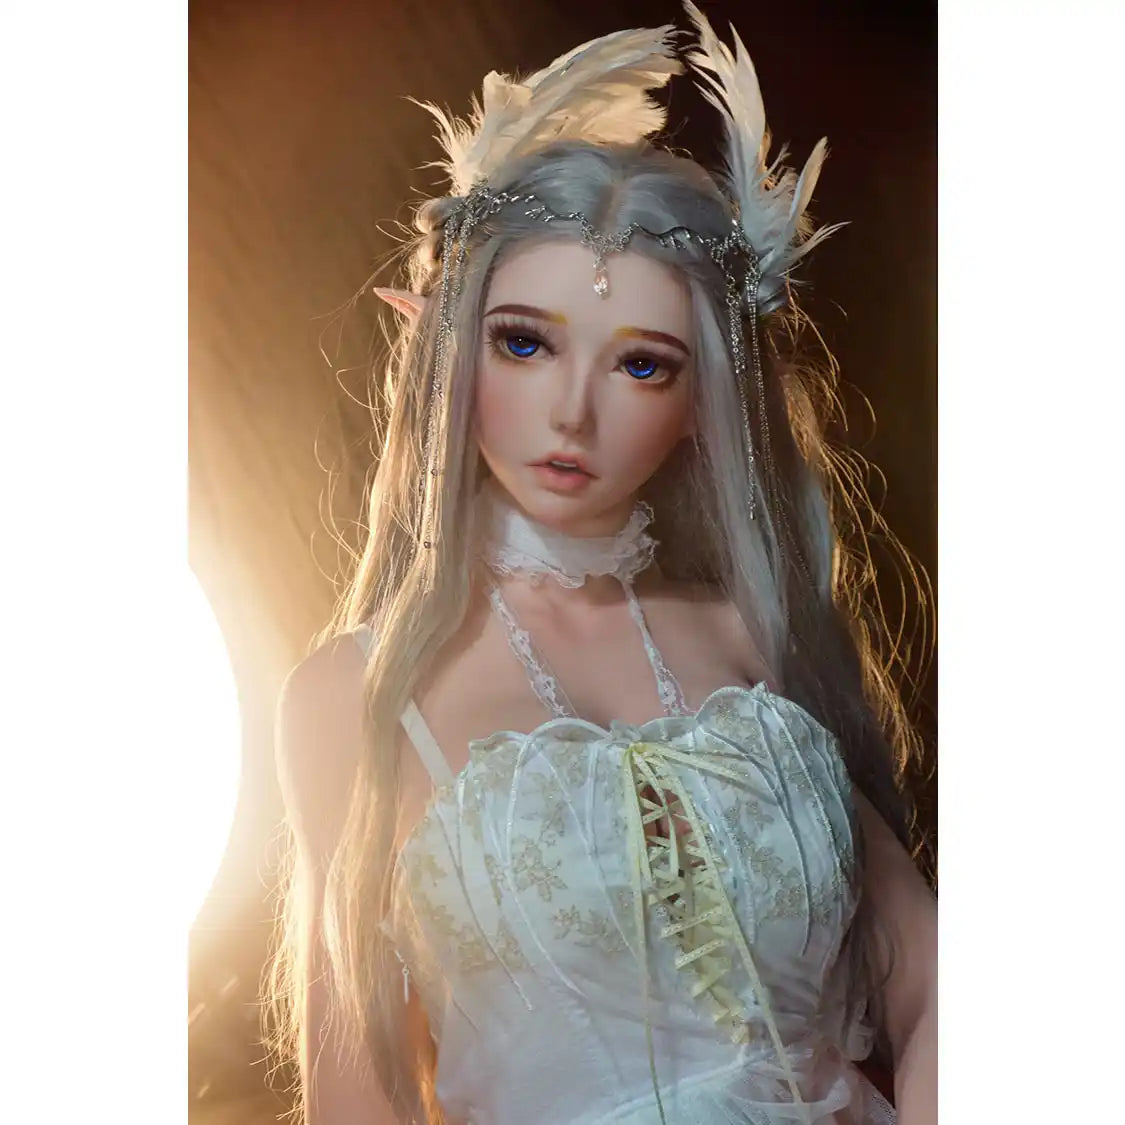 Takano Rie life like 4ft 11in or 150cm luxury anime style Elf princess silicone sex doll with customizable body and hair. By Elsa Babe